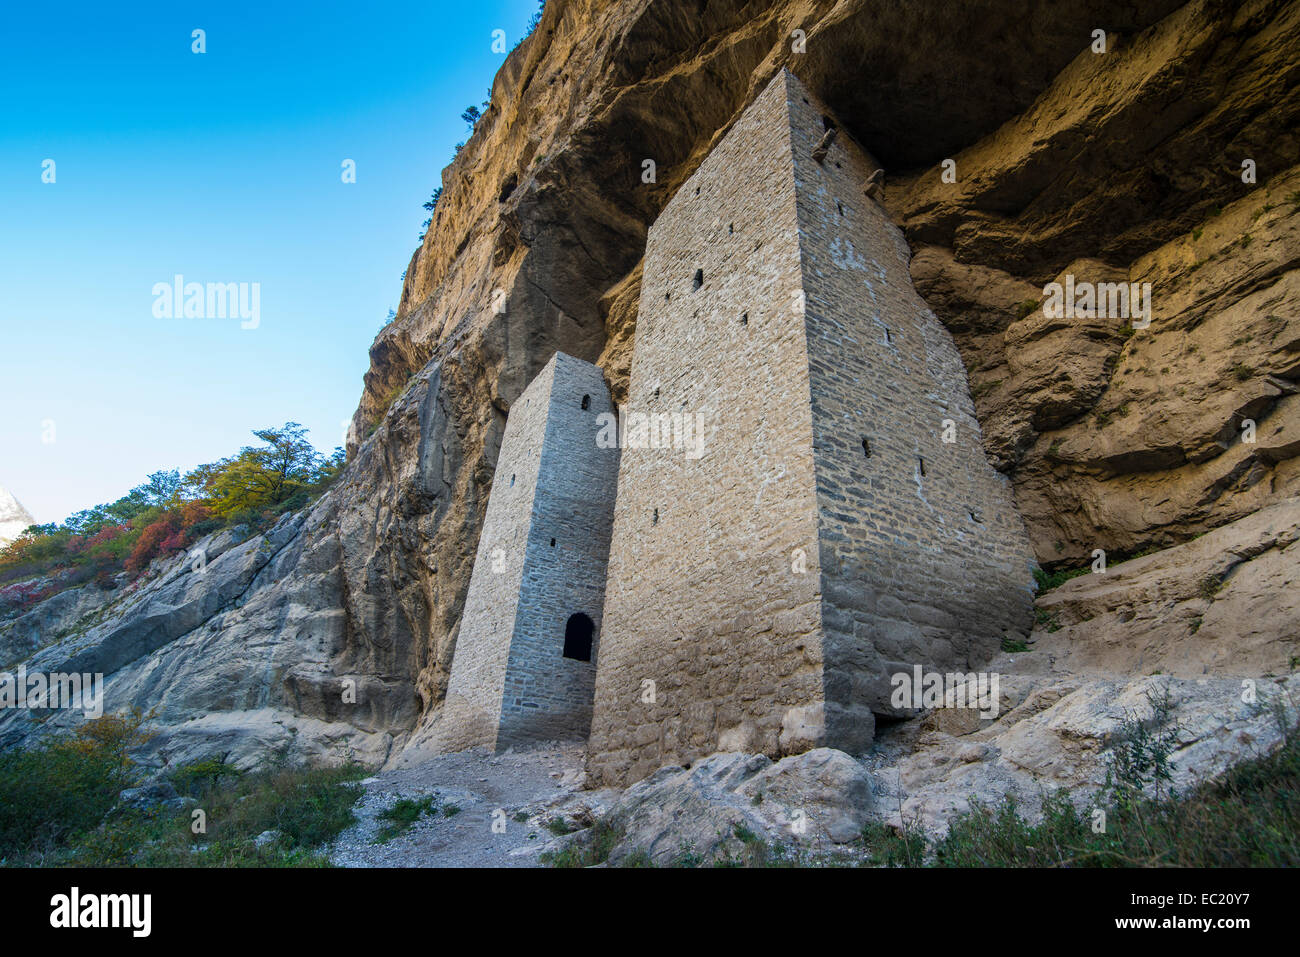 Chechen watchtowers under overhanging cliff on the Argun river, near Itum Kale, Chechnya, Caucasus, Russia Stock Photo